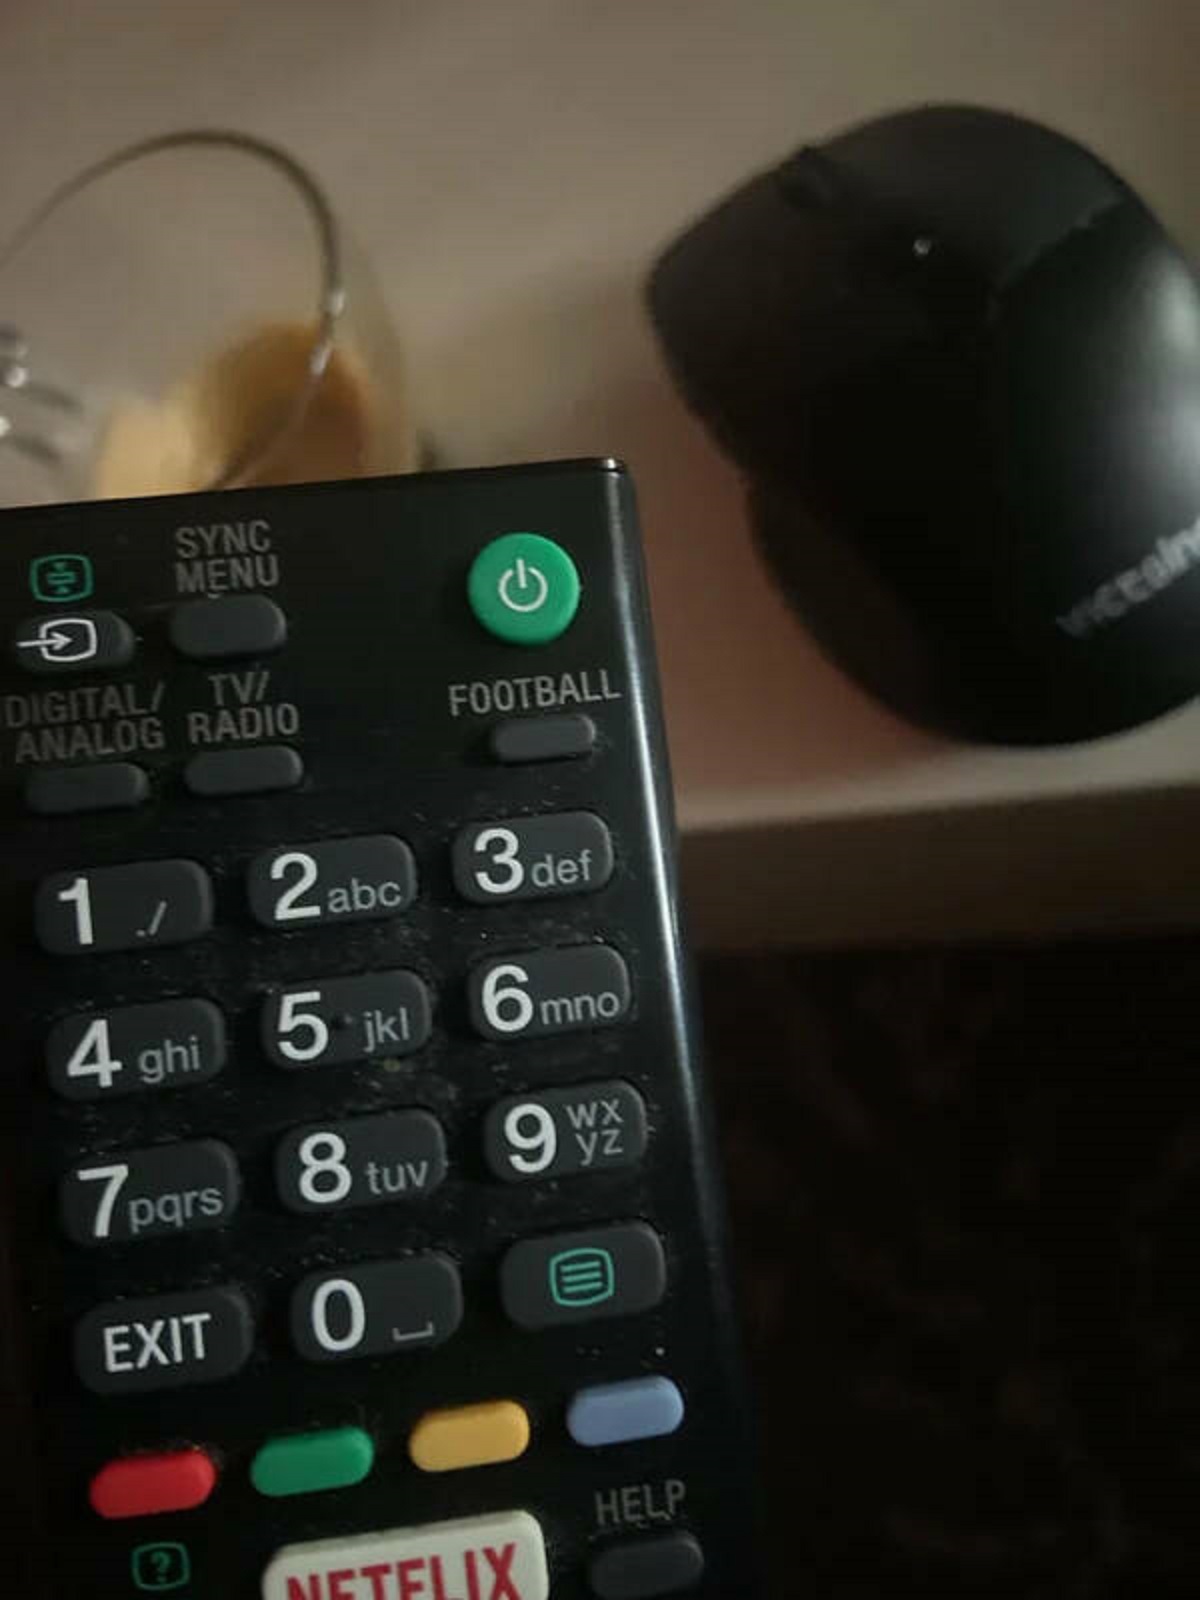 "This TV remote has a football button."